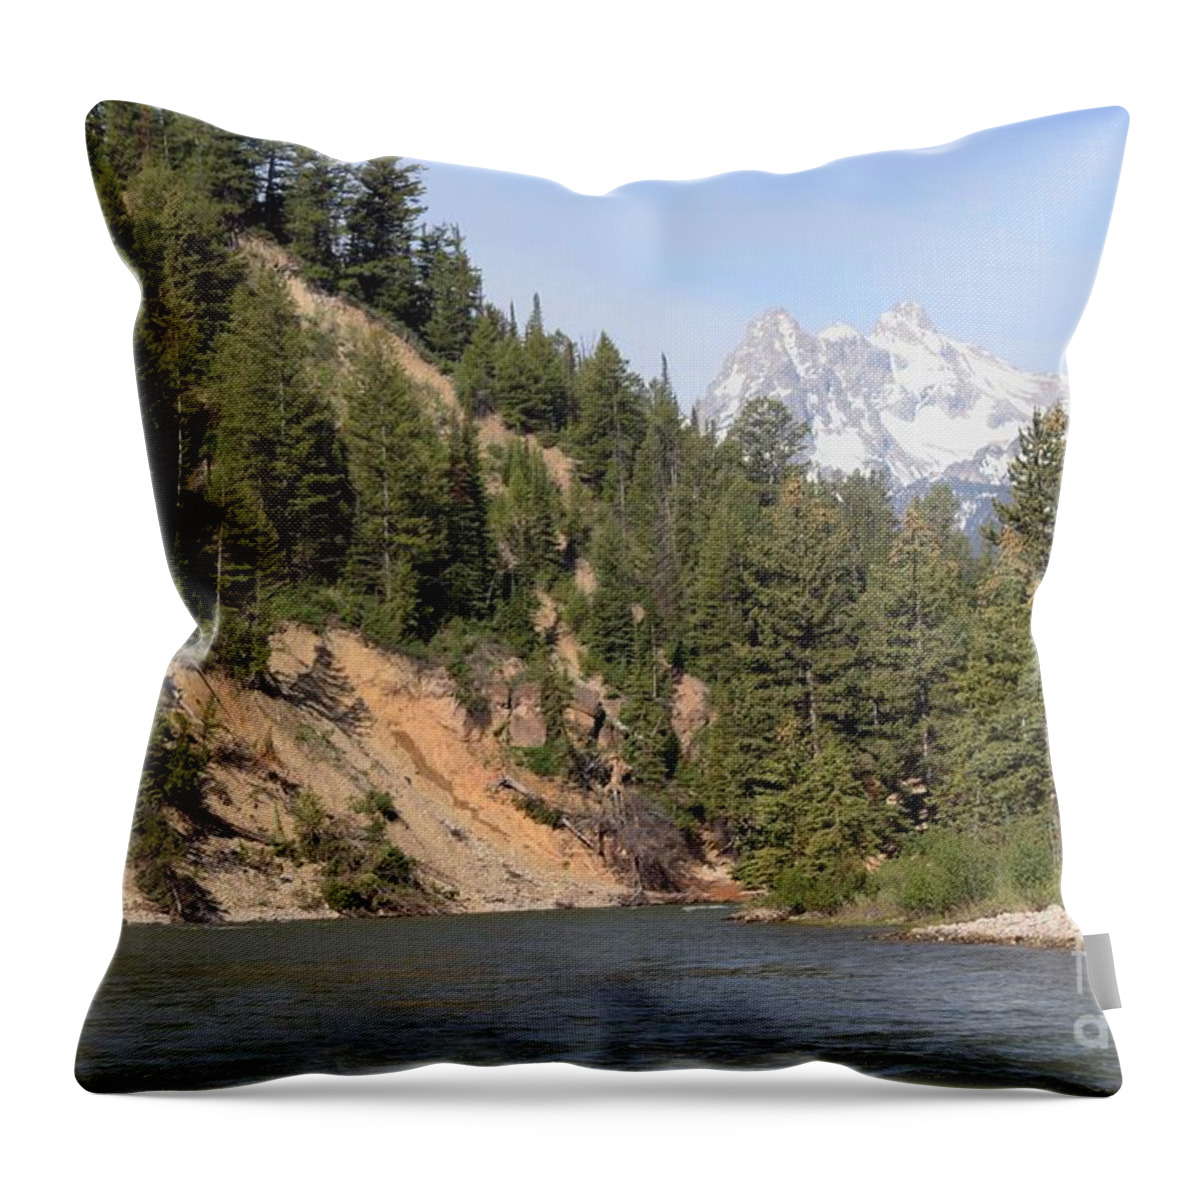 Grand Tetons Throw Pillow featuring the photograph Grand Tetons From Snake River by Living Color Photography Lorraine Lynch